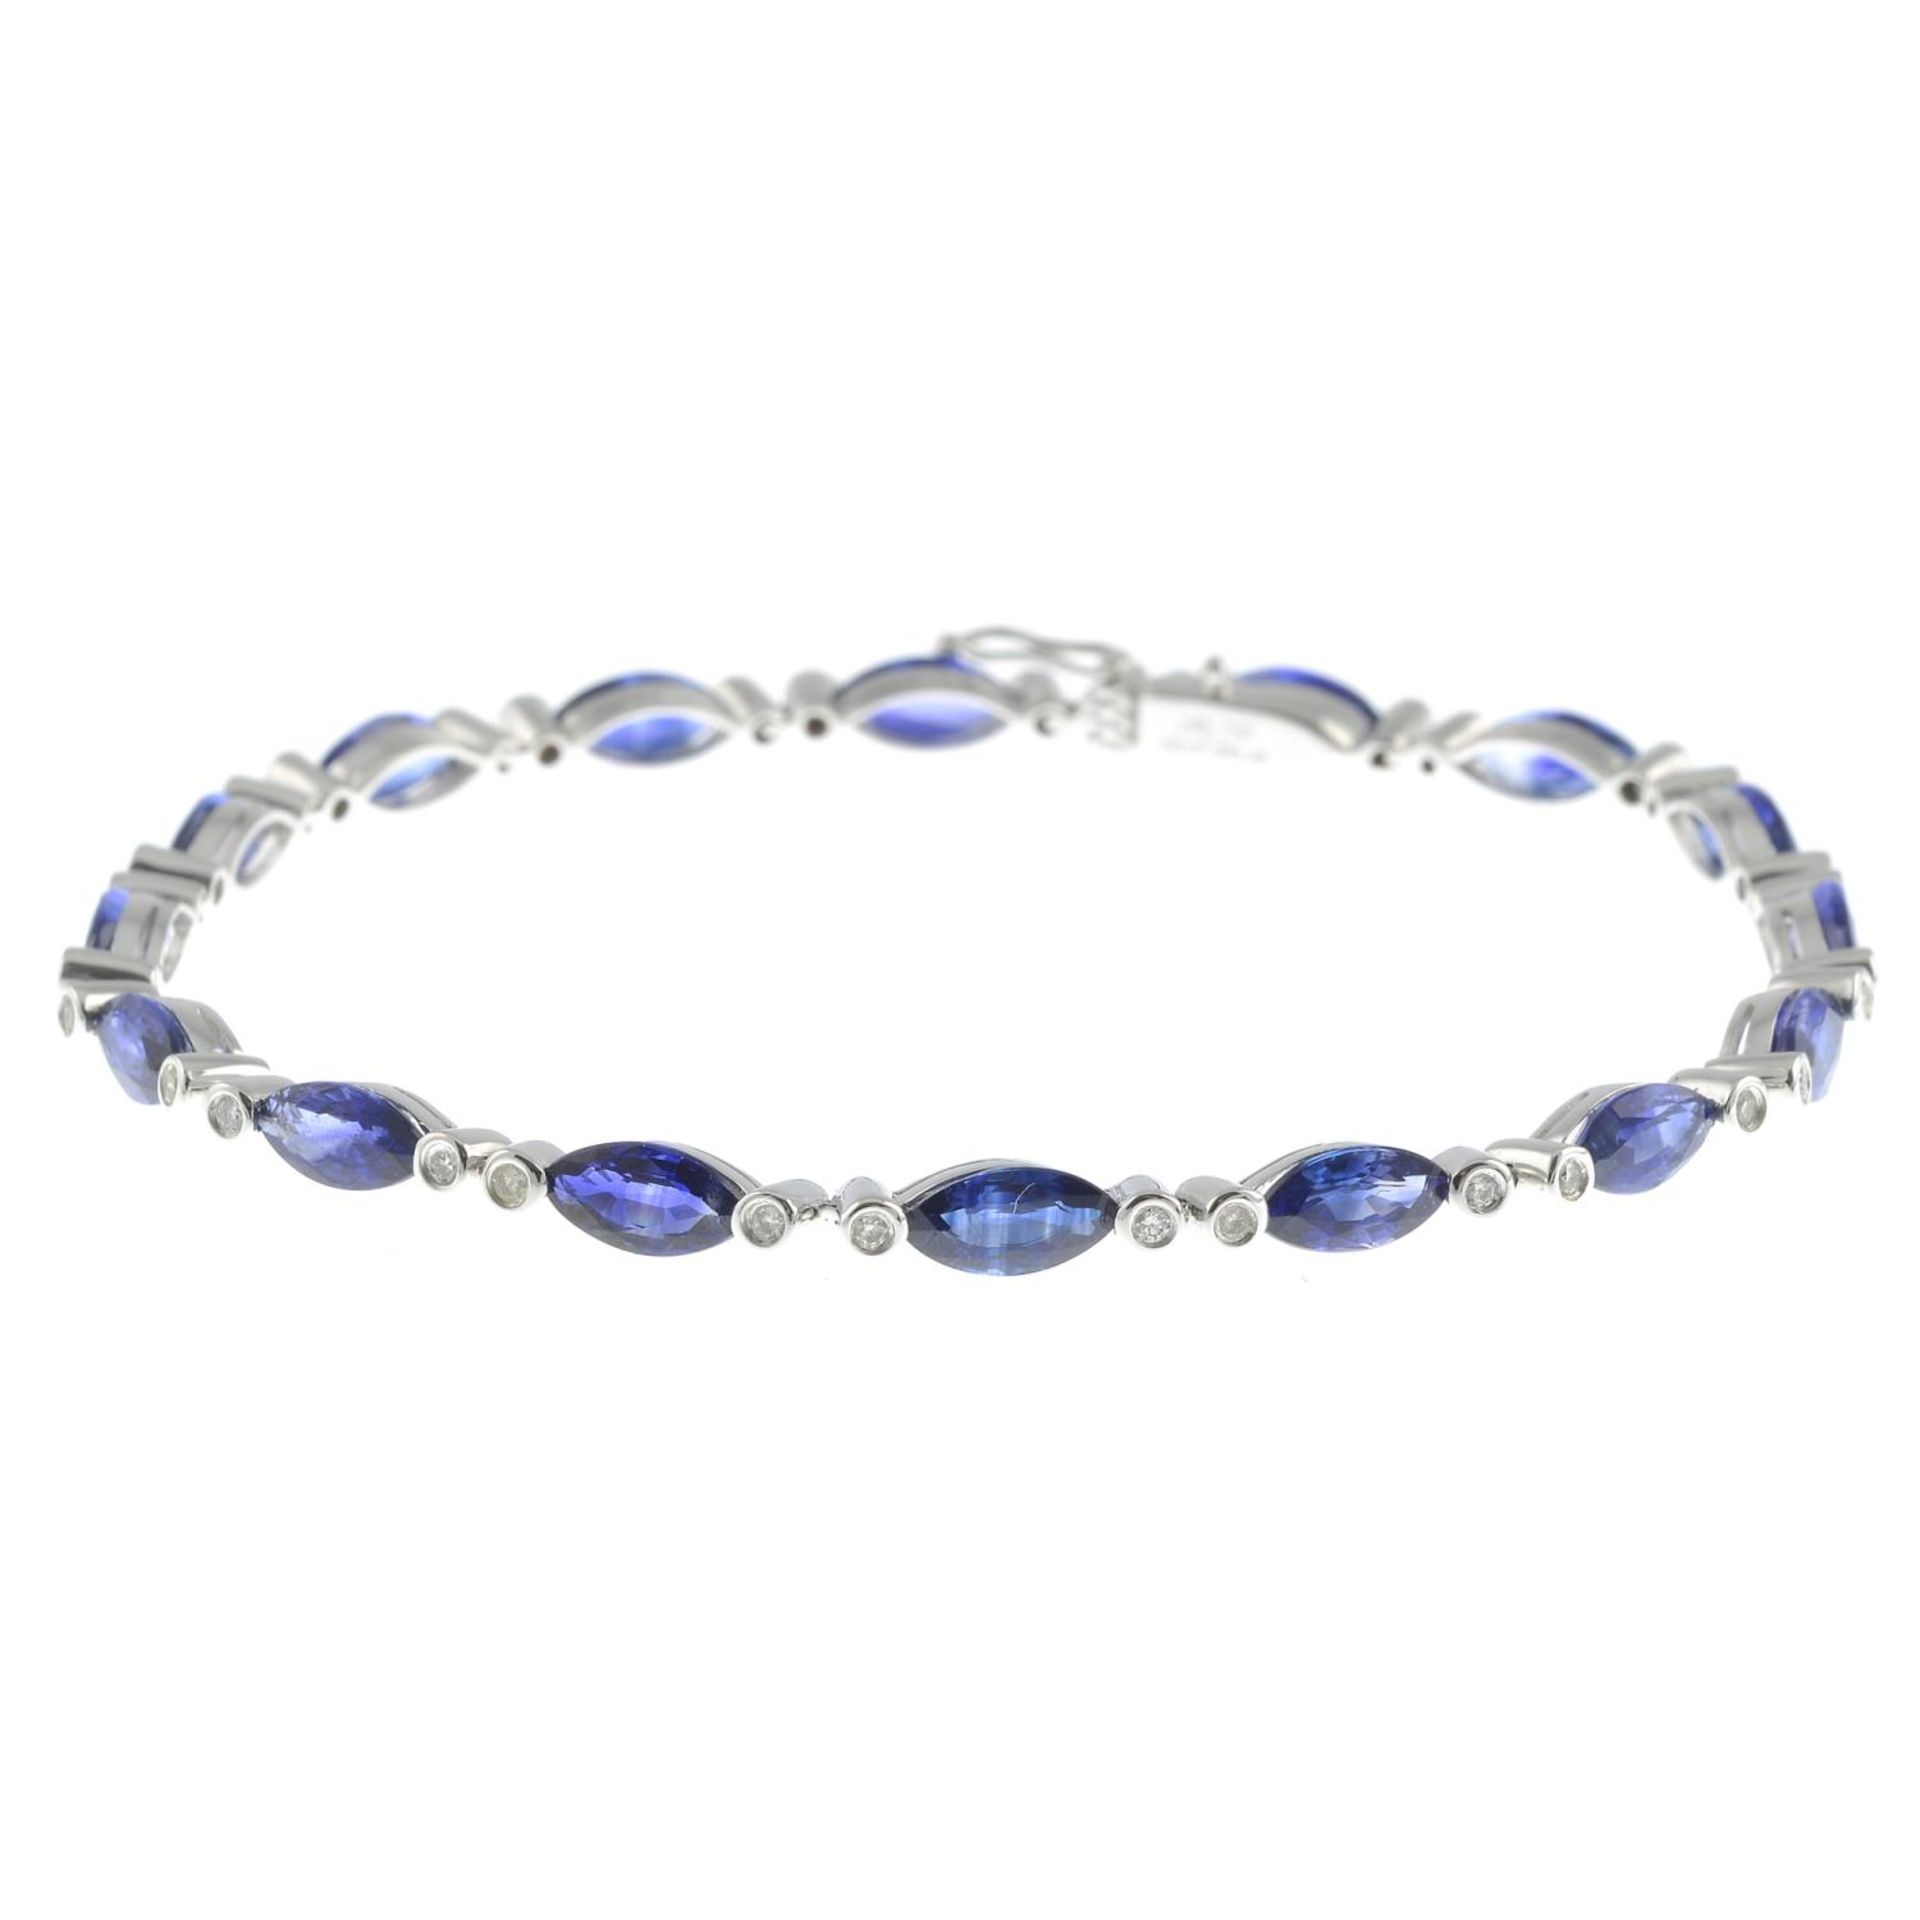 A sapphire and brilliant-cut diamond line bracelet.Total sapphire weight 8.07cts.Total diamond